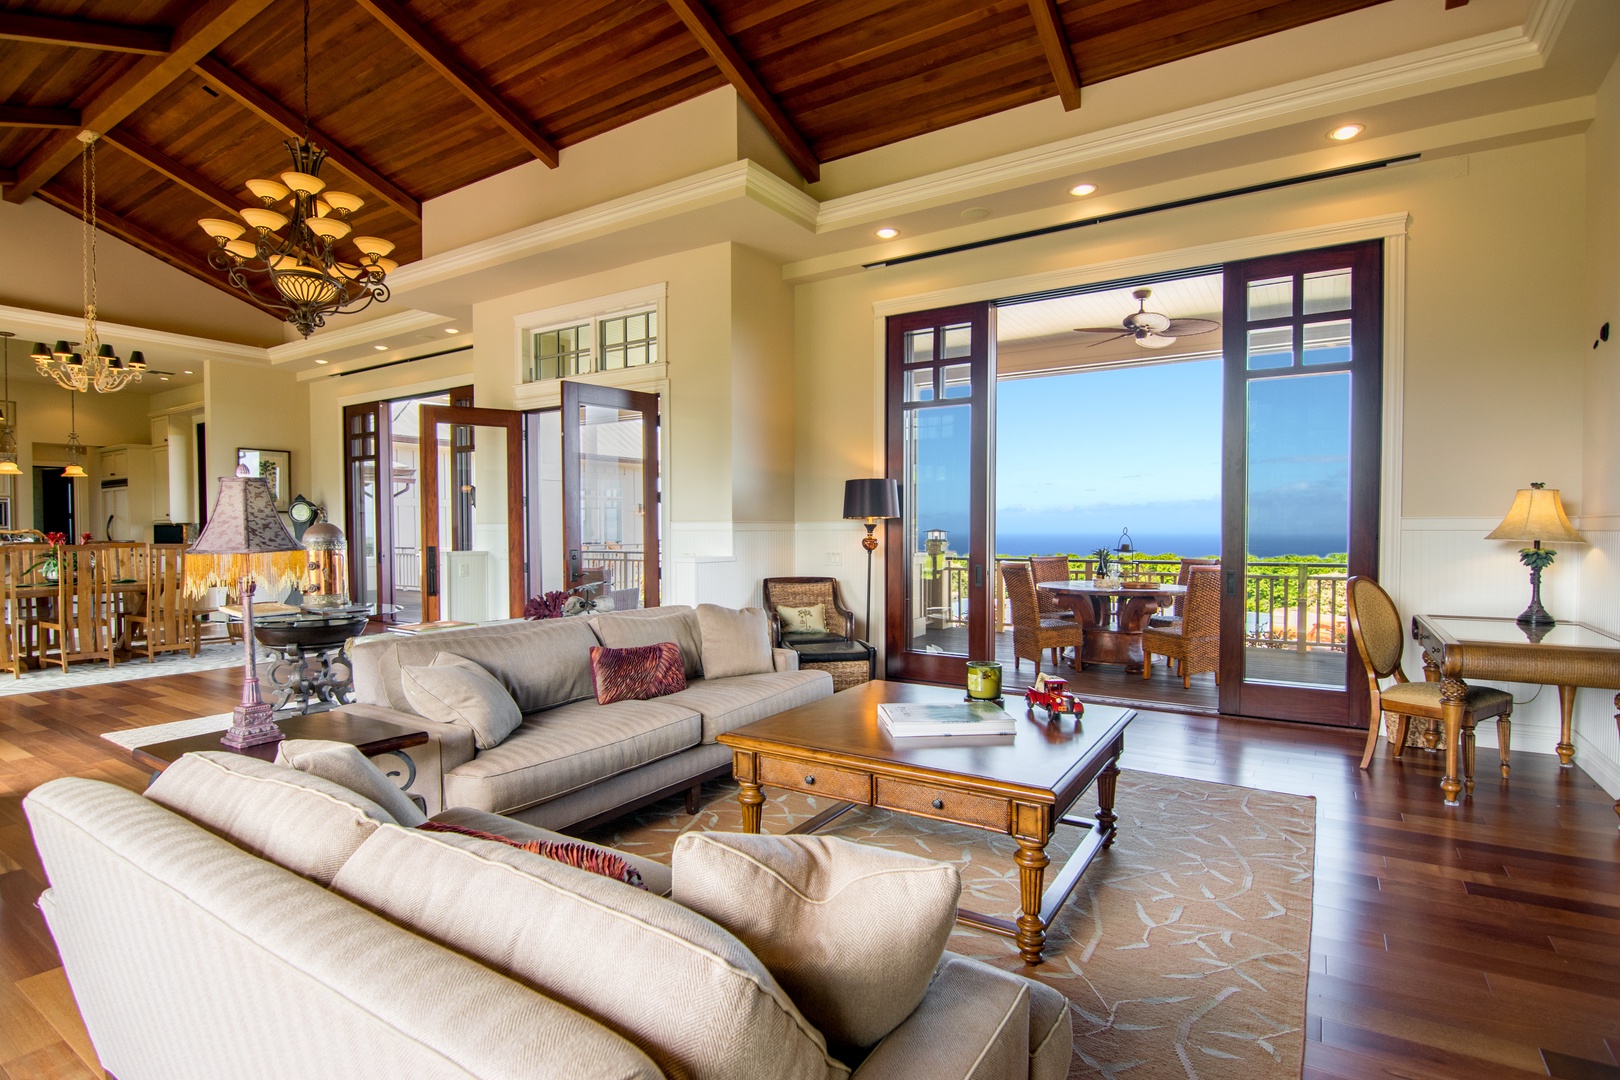 Lahaina Vacation Rentals, Rainbow Hale Estate* - Living Room and View of Ocean